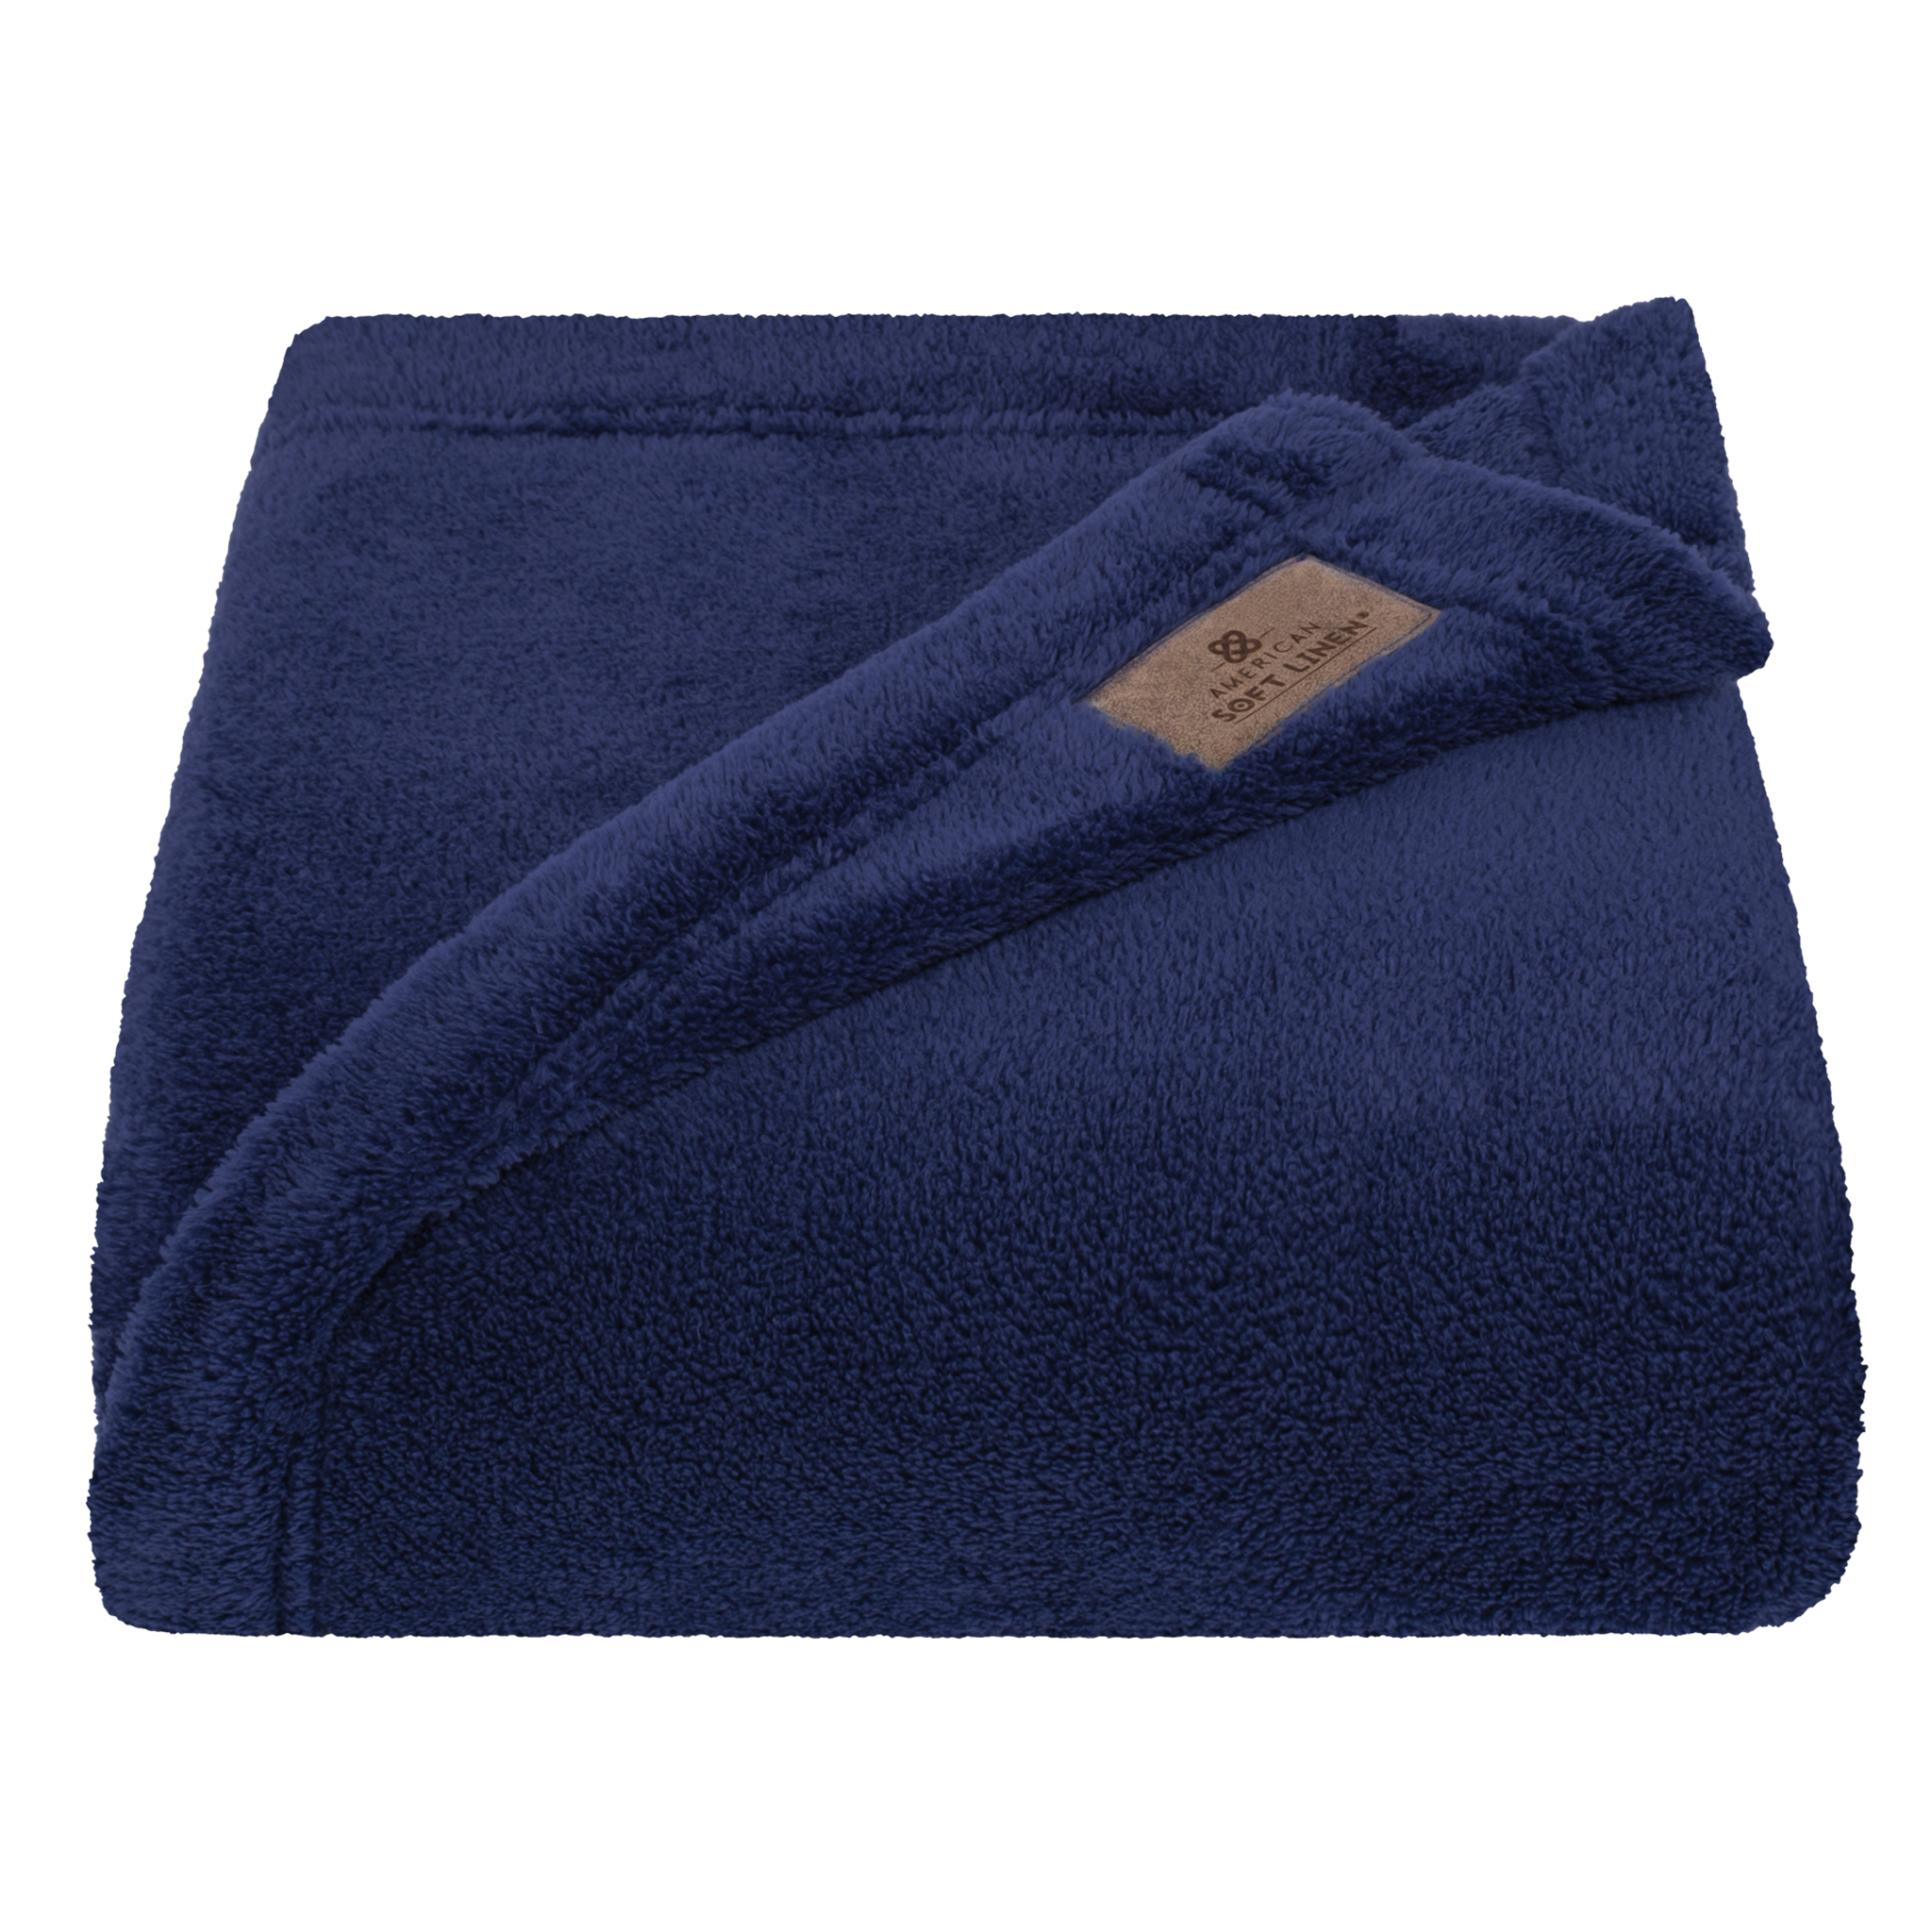 American Soft Linen - Bedding Fleece Blanket - Wholesale - 24 Set Case Pack - Throw Size 50x60 inches - Navy-Blue - 3